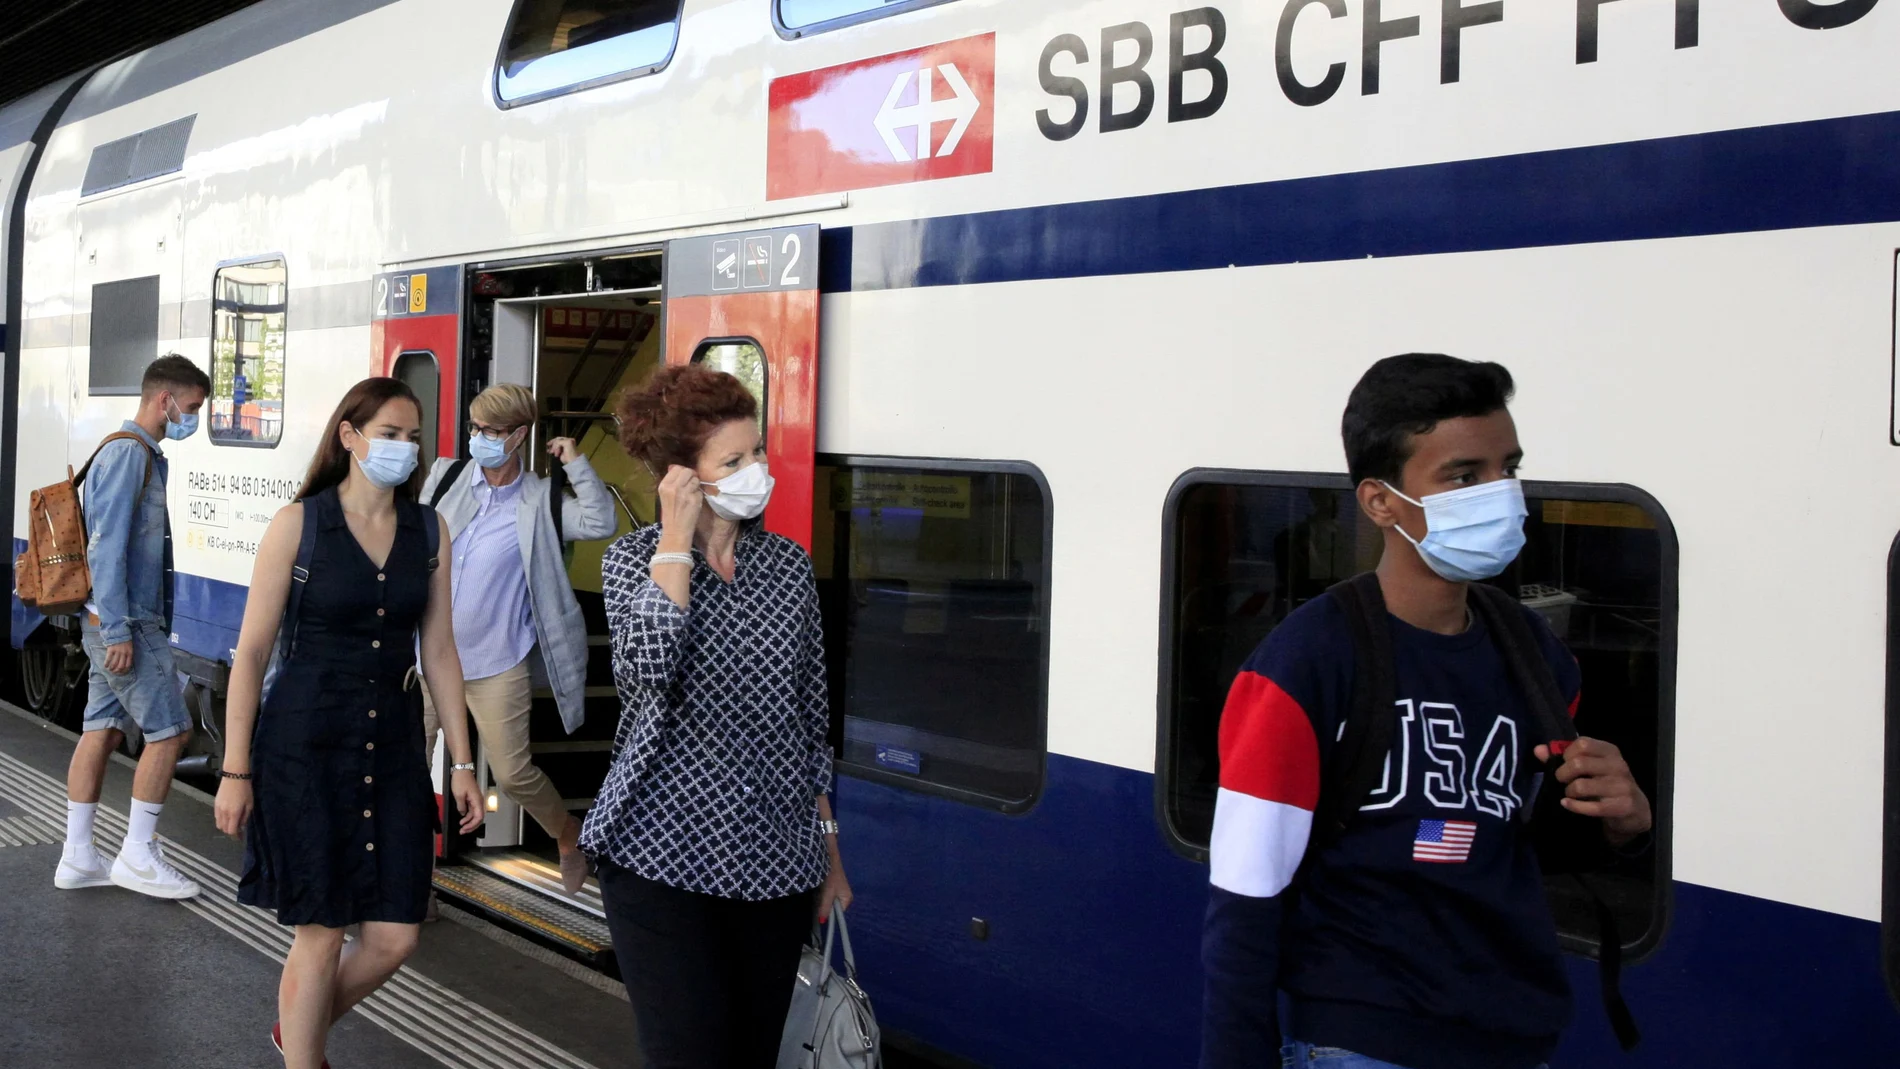 FILE PHOTO: Passengers wear protective masks as they leave a train of Swiss railway operator SBB in Zurich, Switzerland